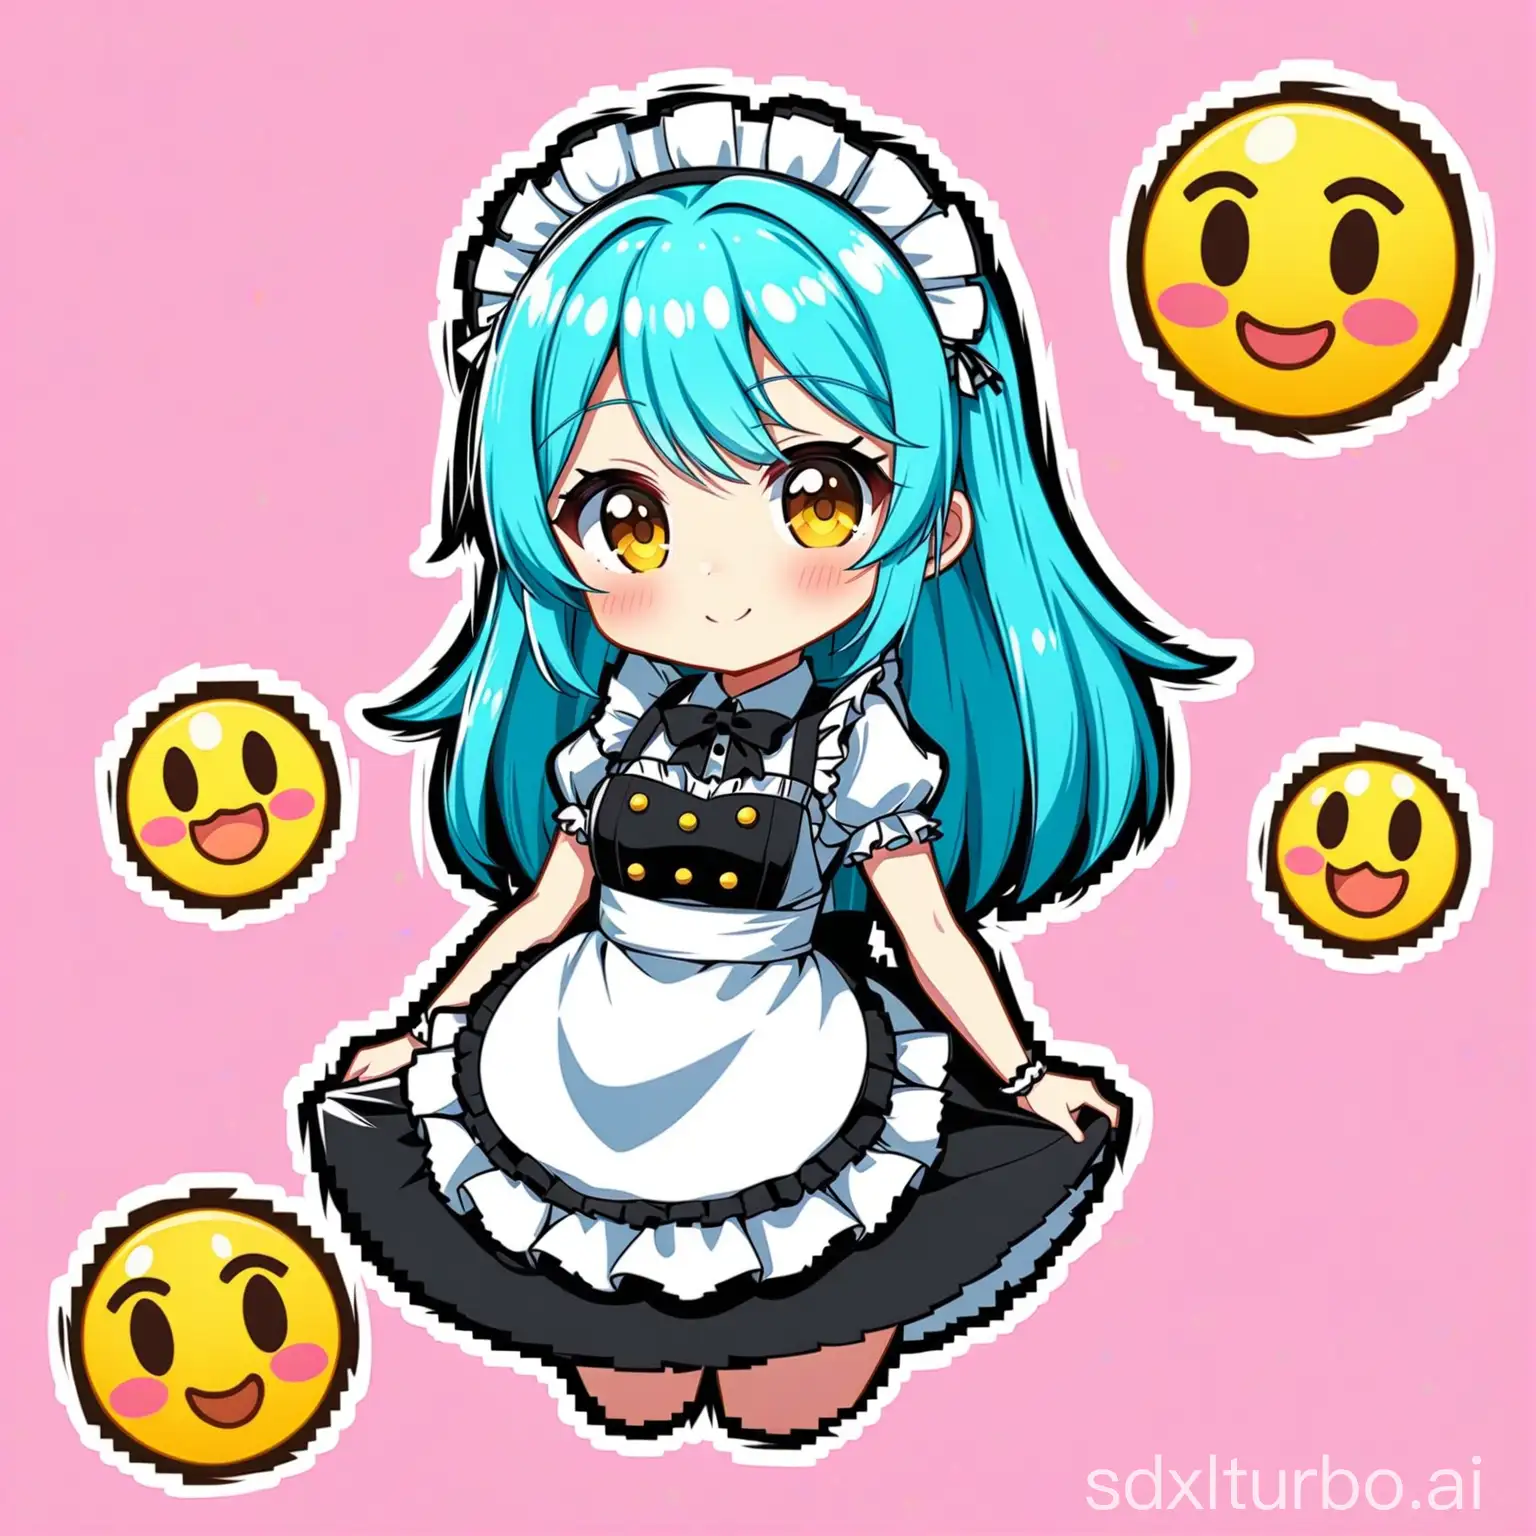 Anime-inspired cute sexy maid outfit stickers emoji